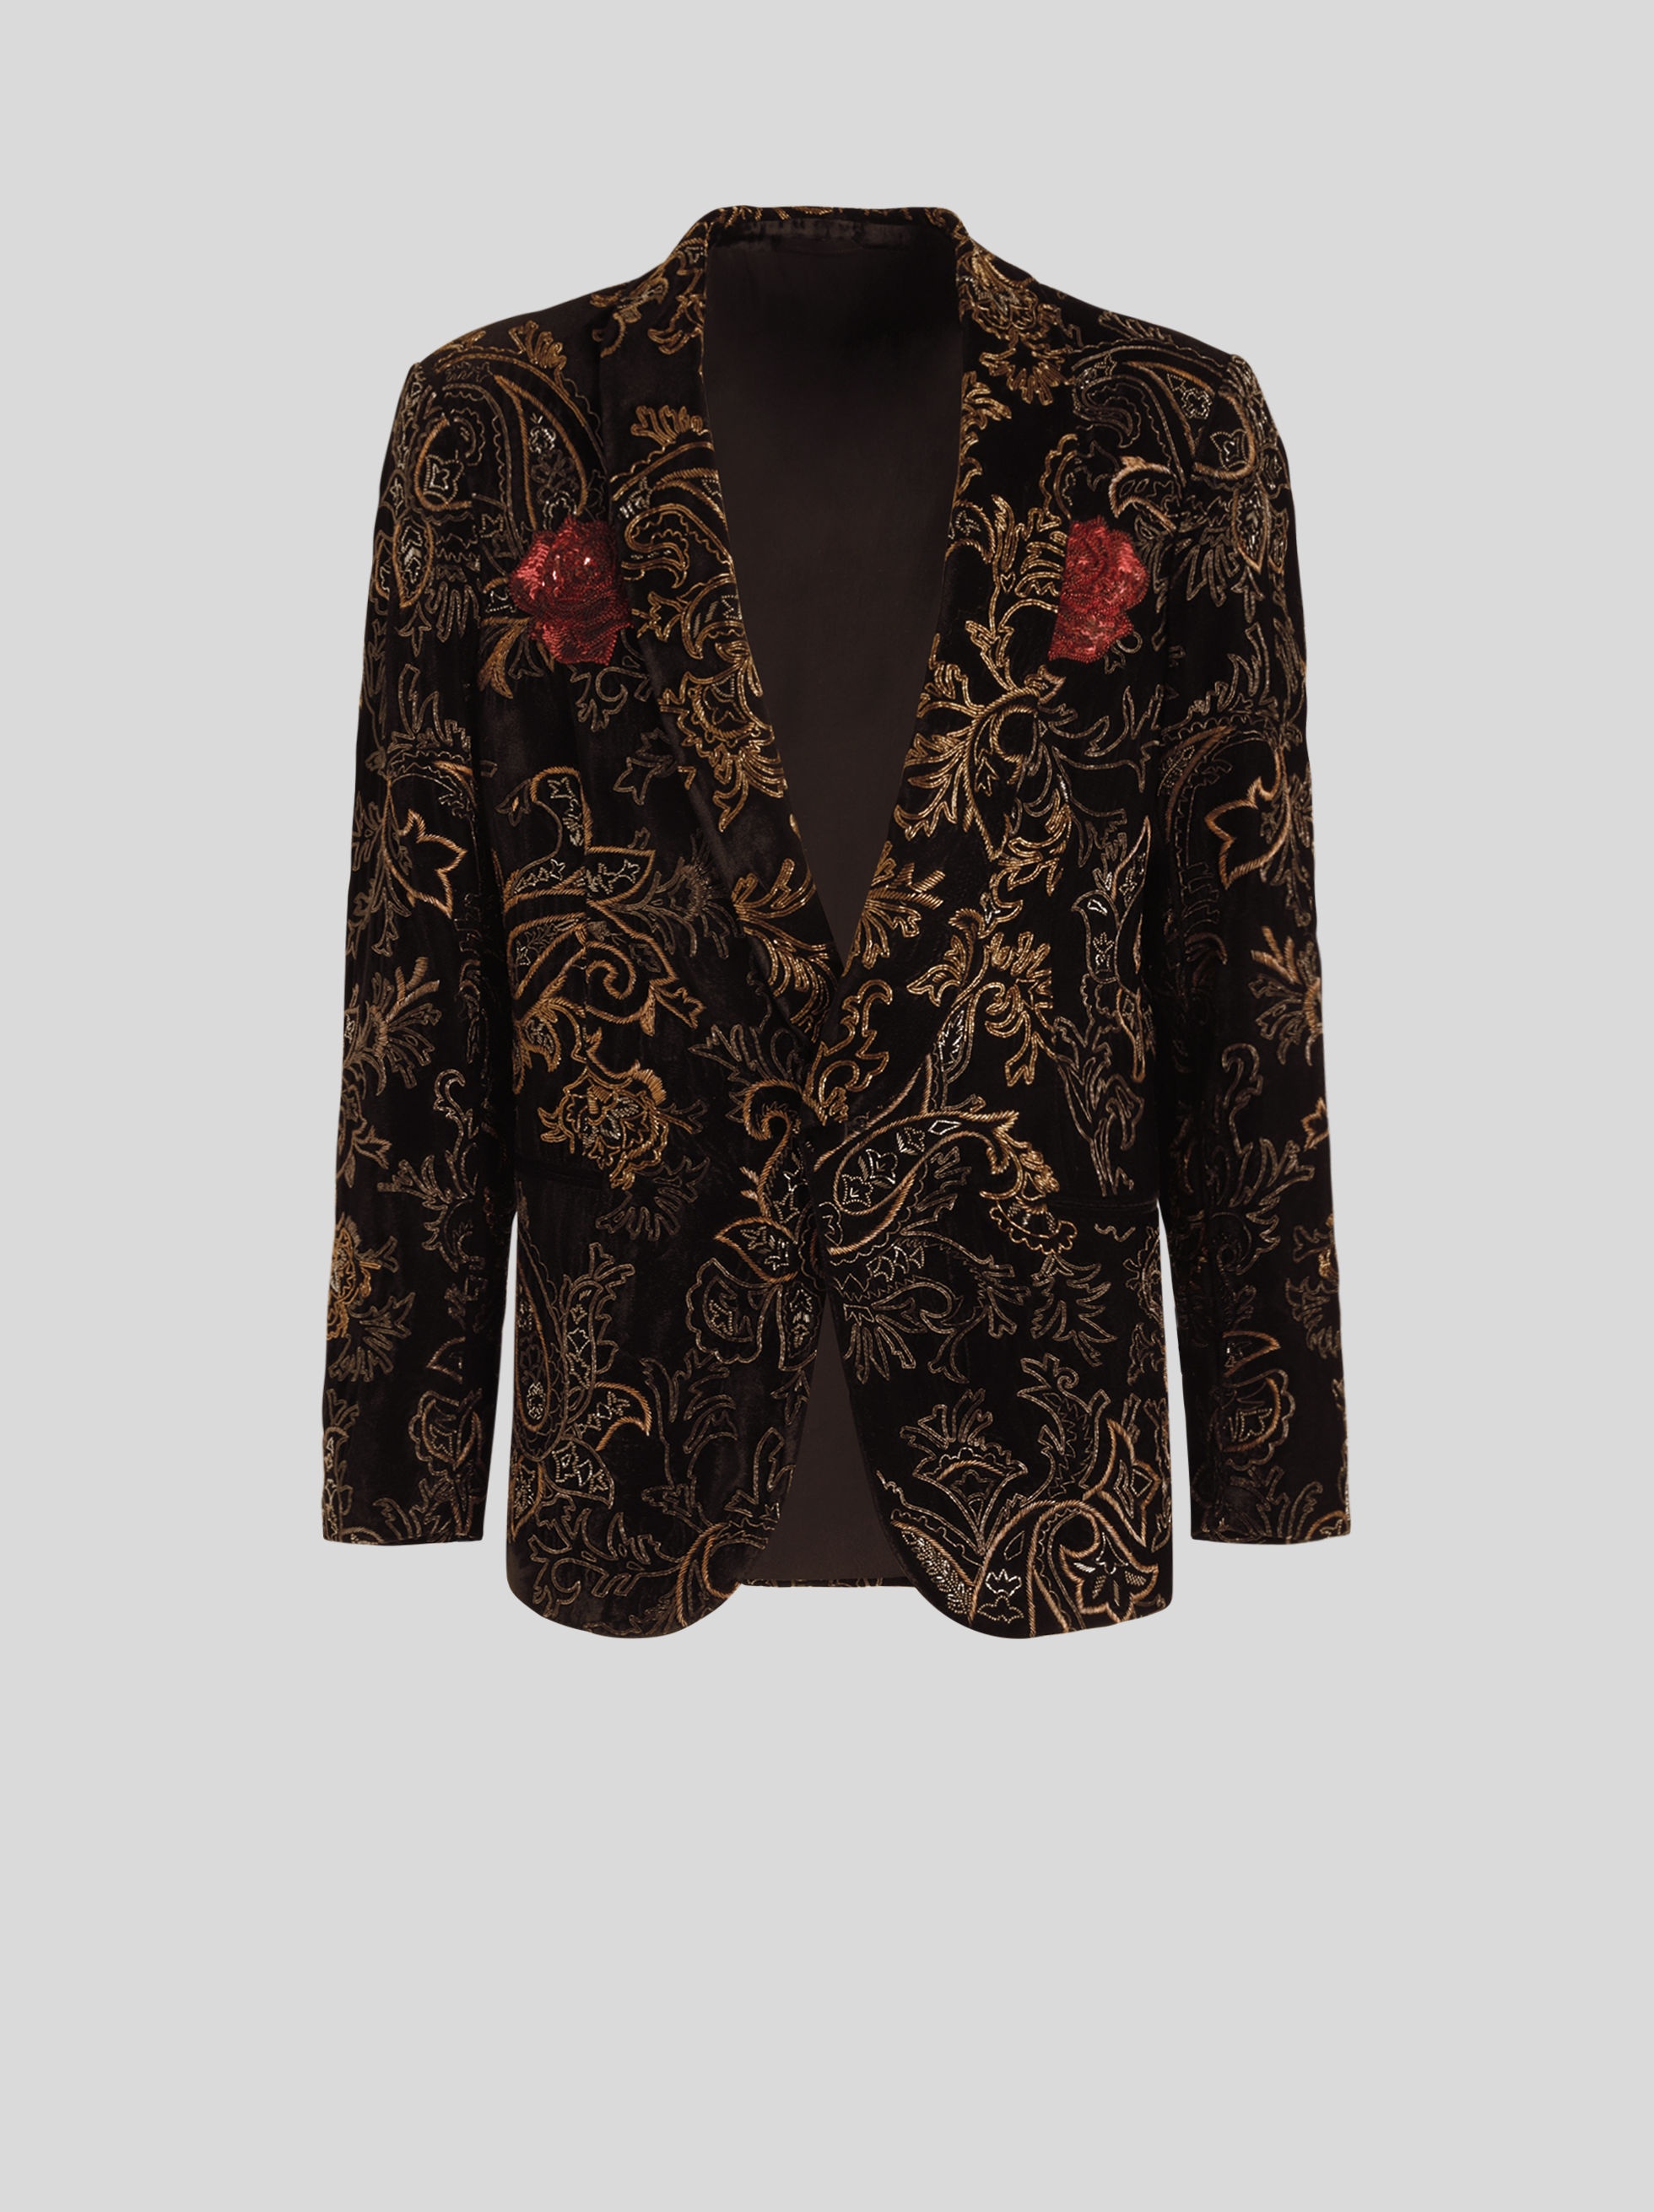 SEMI-TRADITIONAL JACKET EMBROIDERED WITH PAISLEY PATTERNS AND ROSE - 1